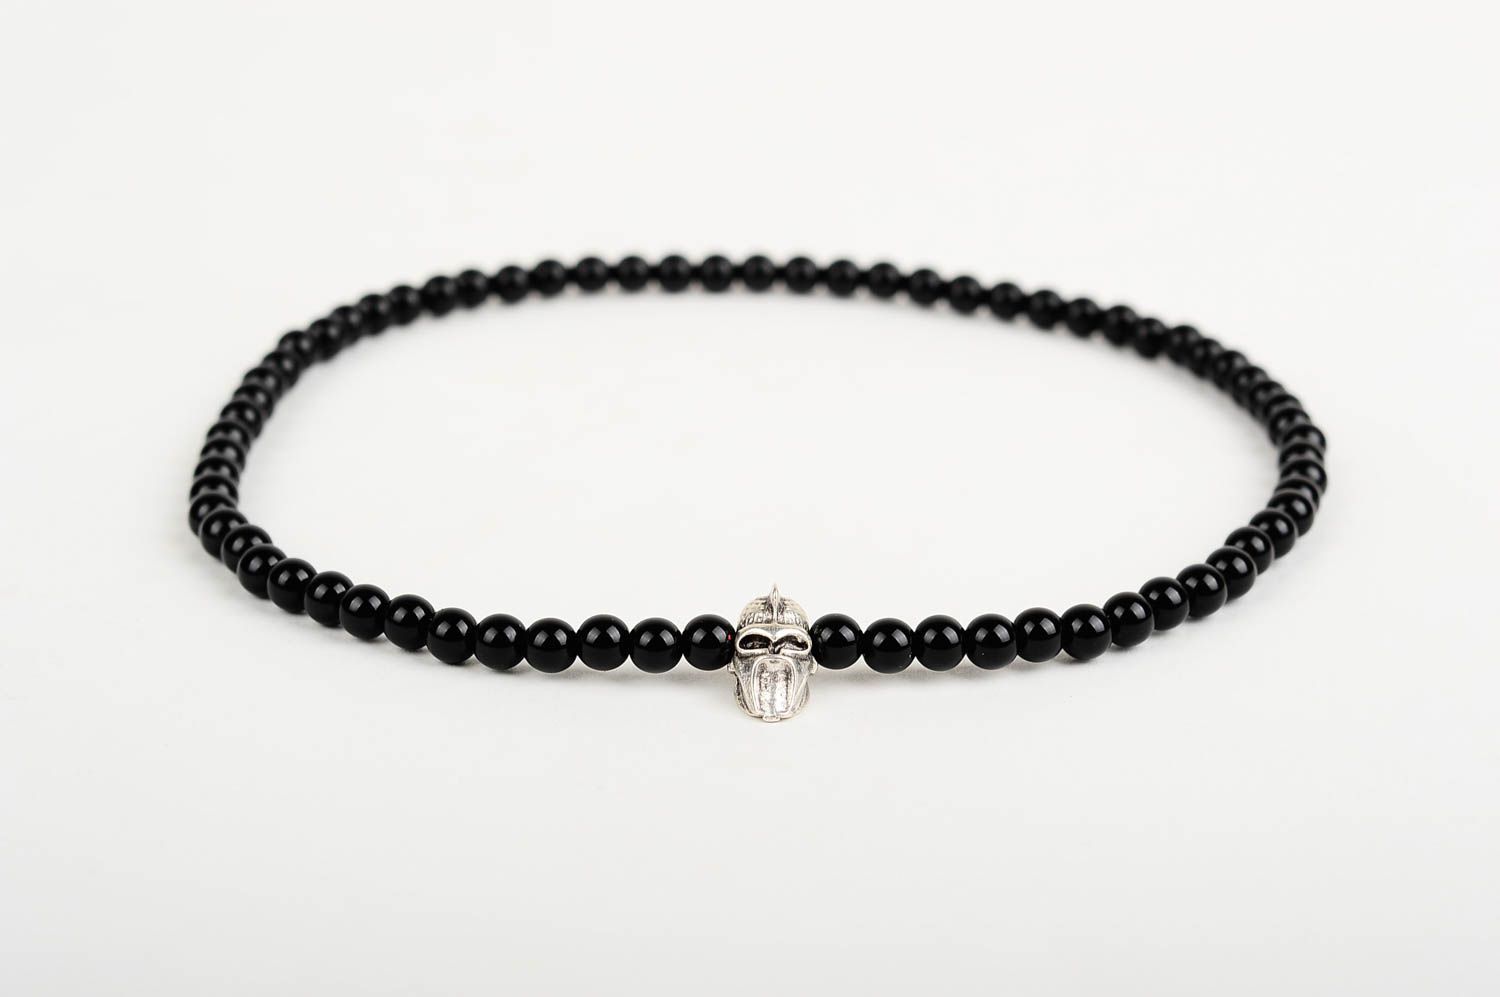 Double bracelet with beads handmade accessories wrist bracelet with skull   photo 4